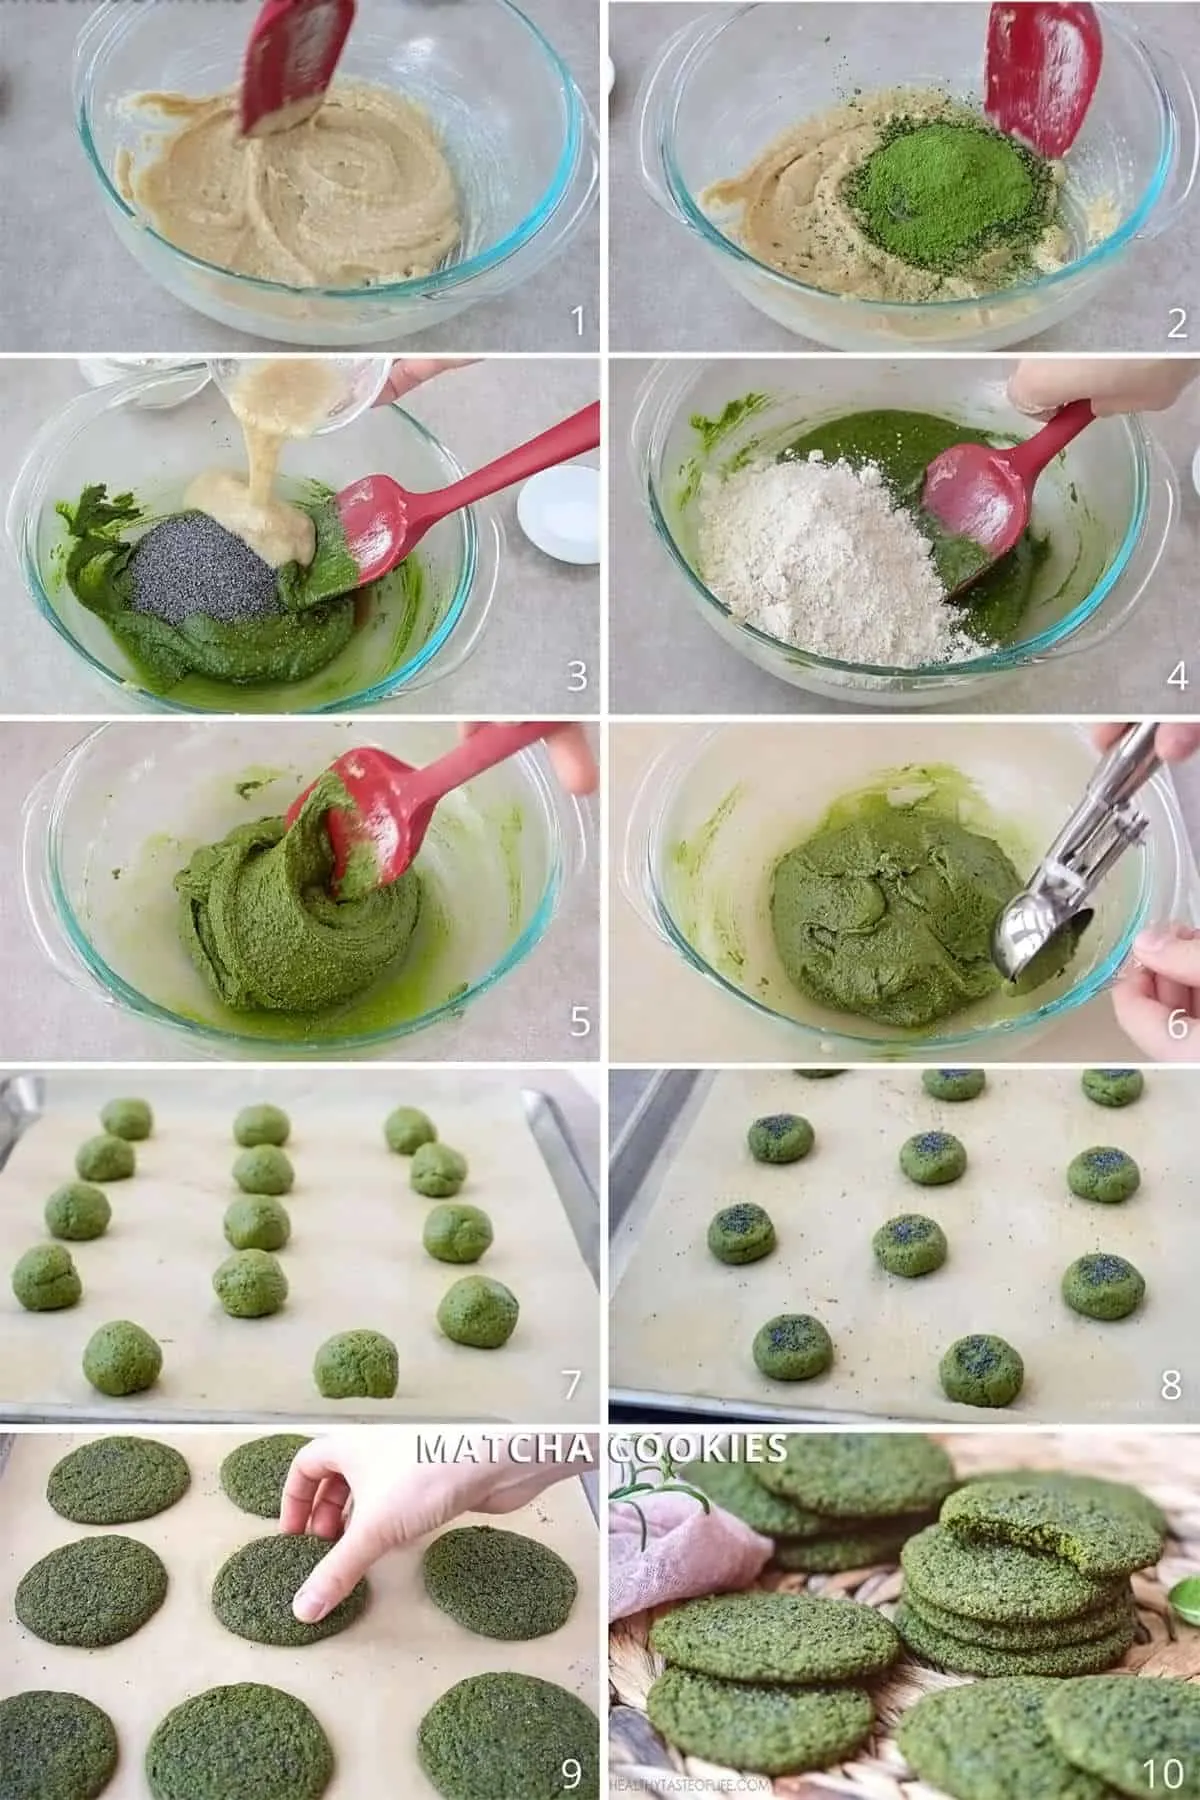 How to make healthy vegan matcha cookies with gluten free flour and without egg. How to make chewy matcha cookies and matcha oatmeal cookies without eggs and refined sugar. #matchacookies #vegan #glutenfree #healthy #recipe #video